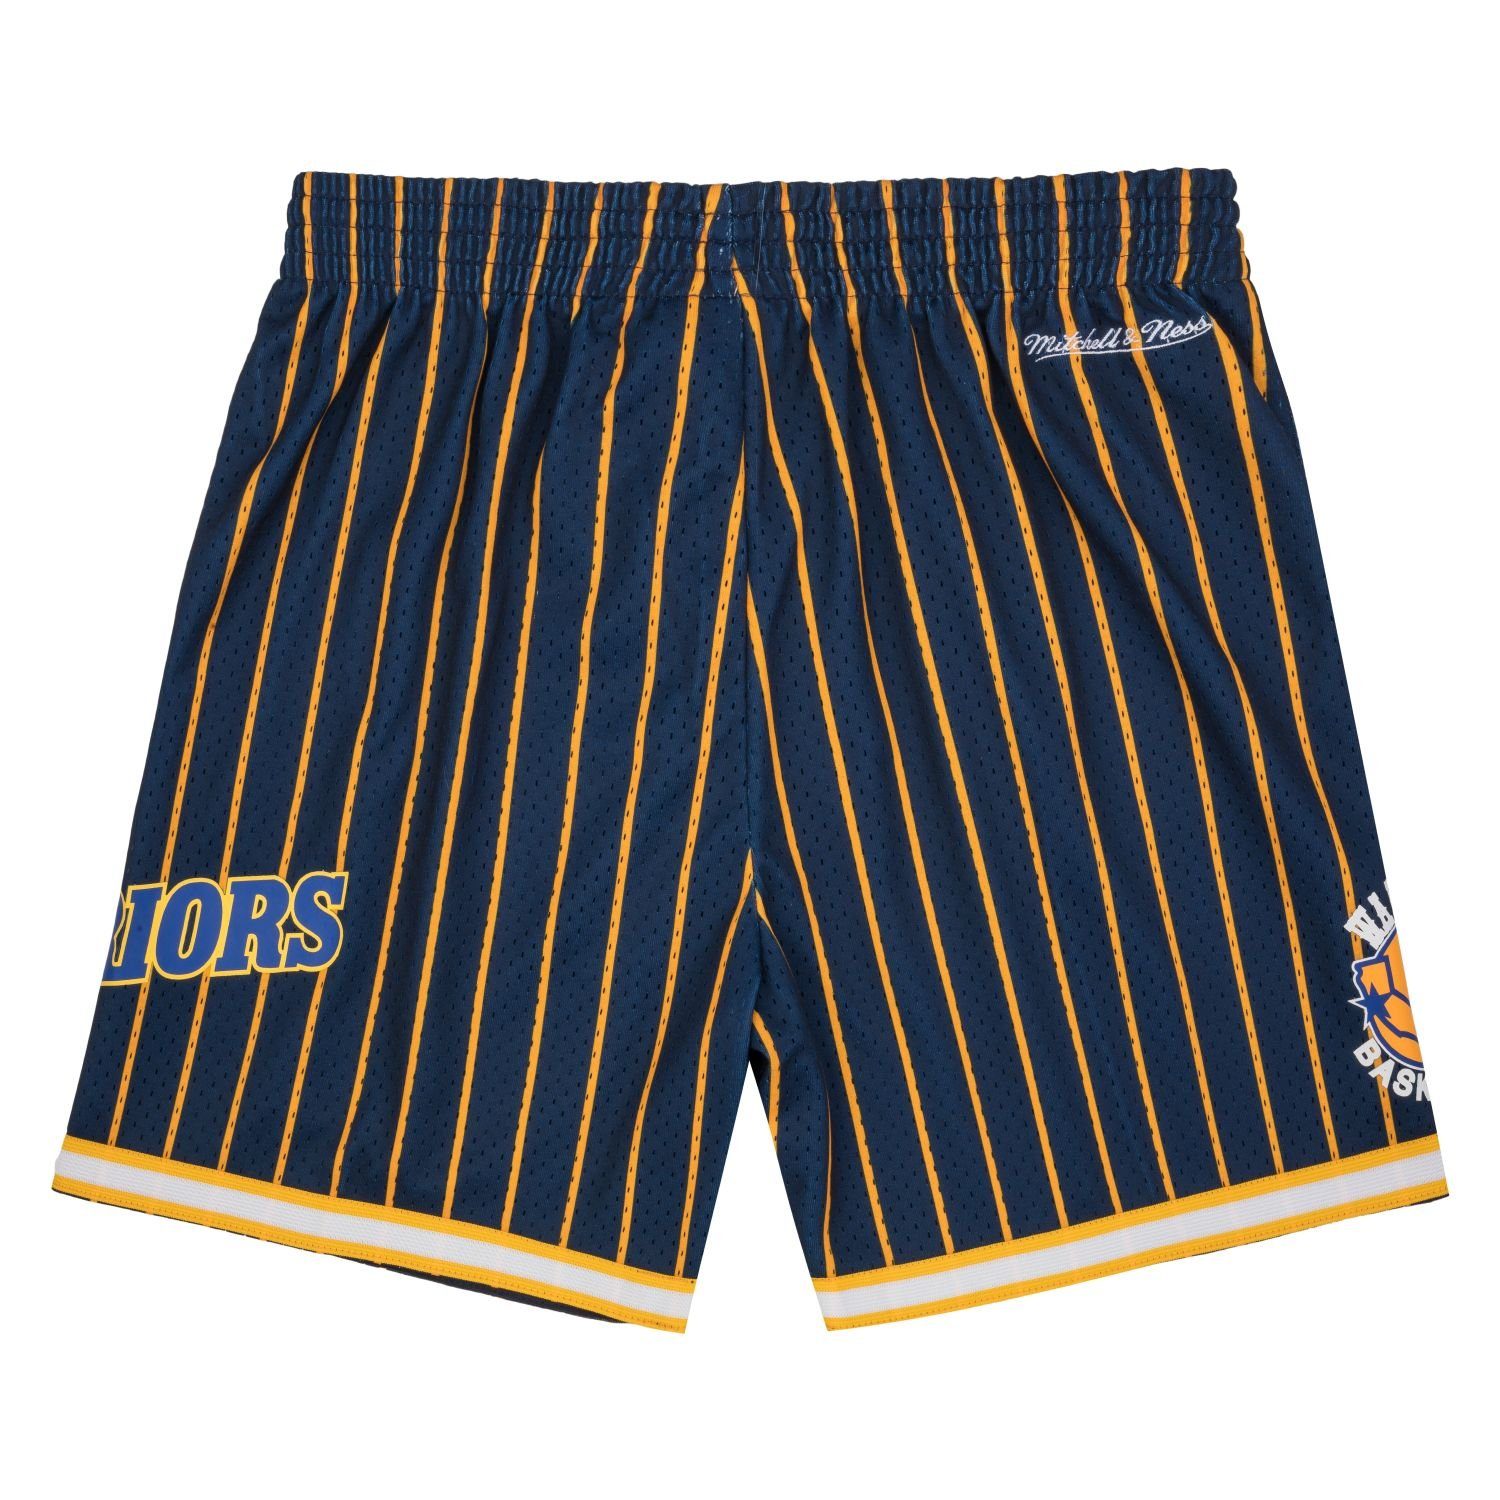 & Collection Mitchell Golden Warriors Shorts State Ness City